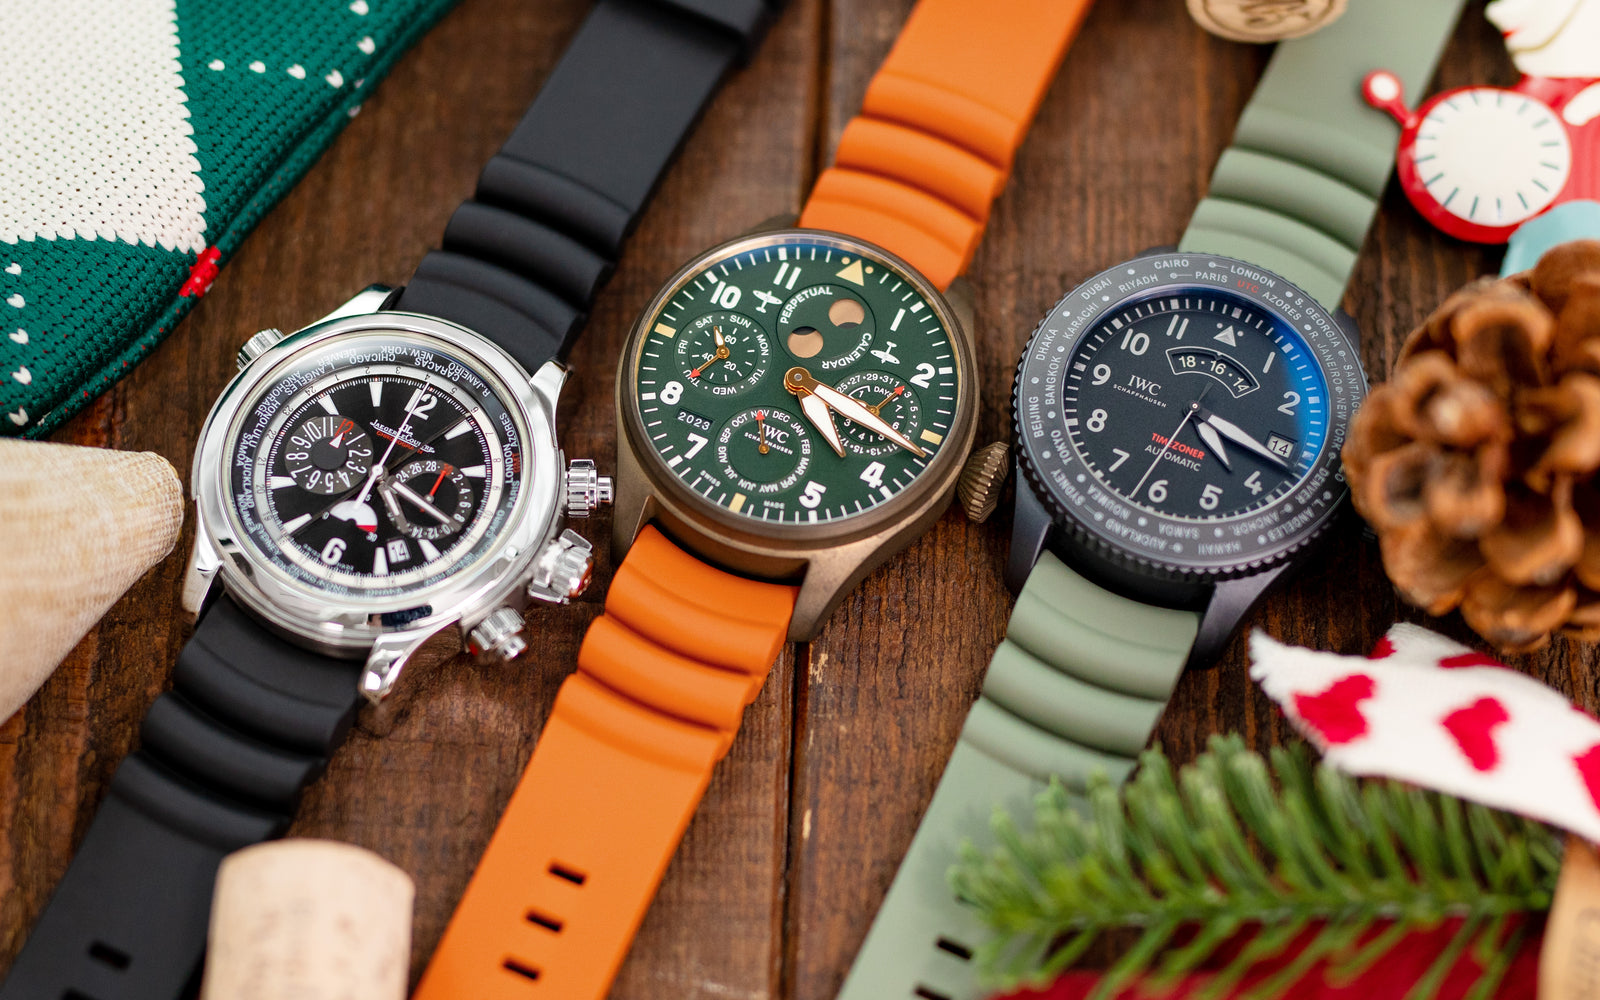 25 coolest watches made in 2023